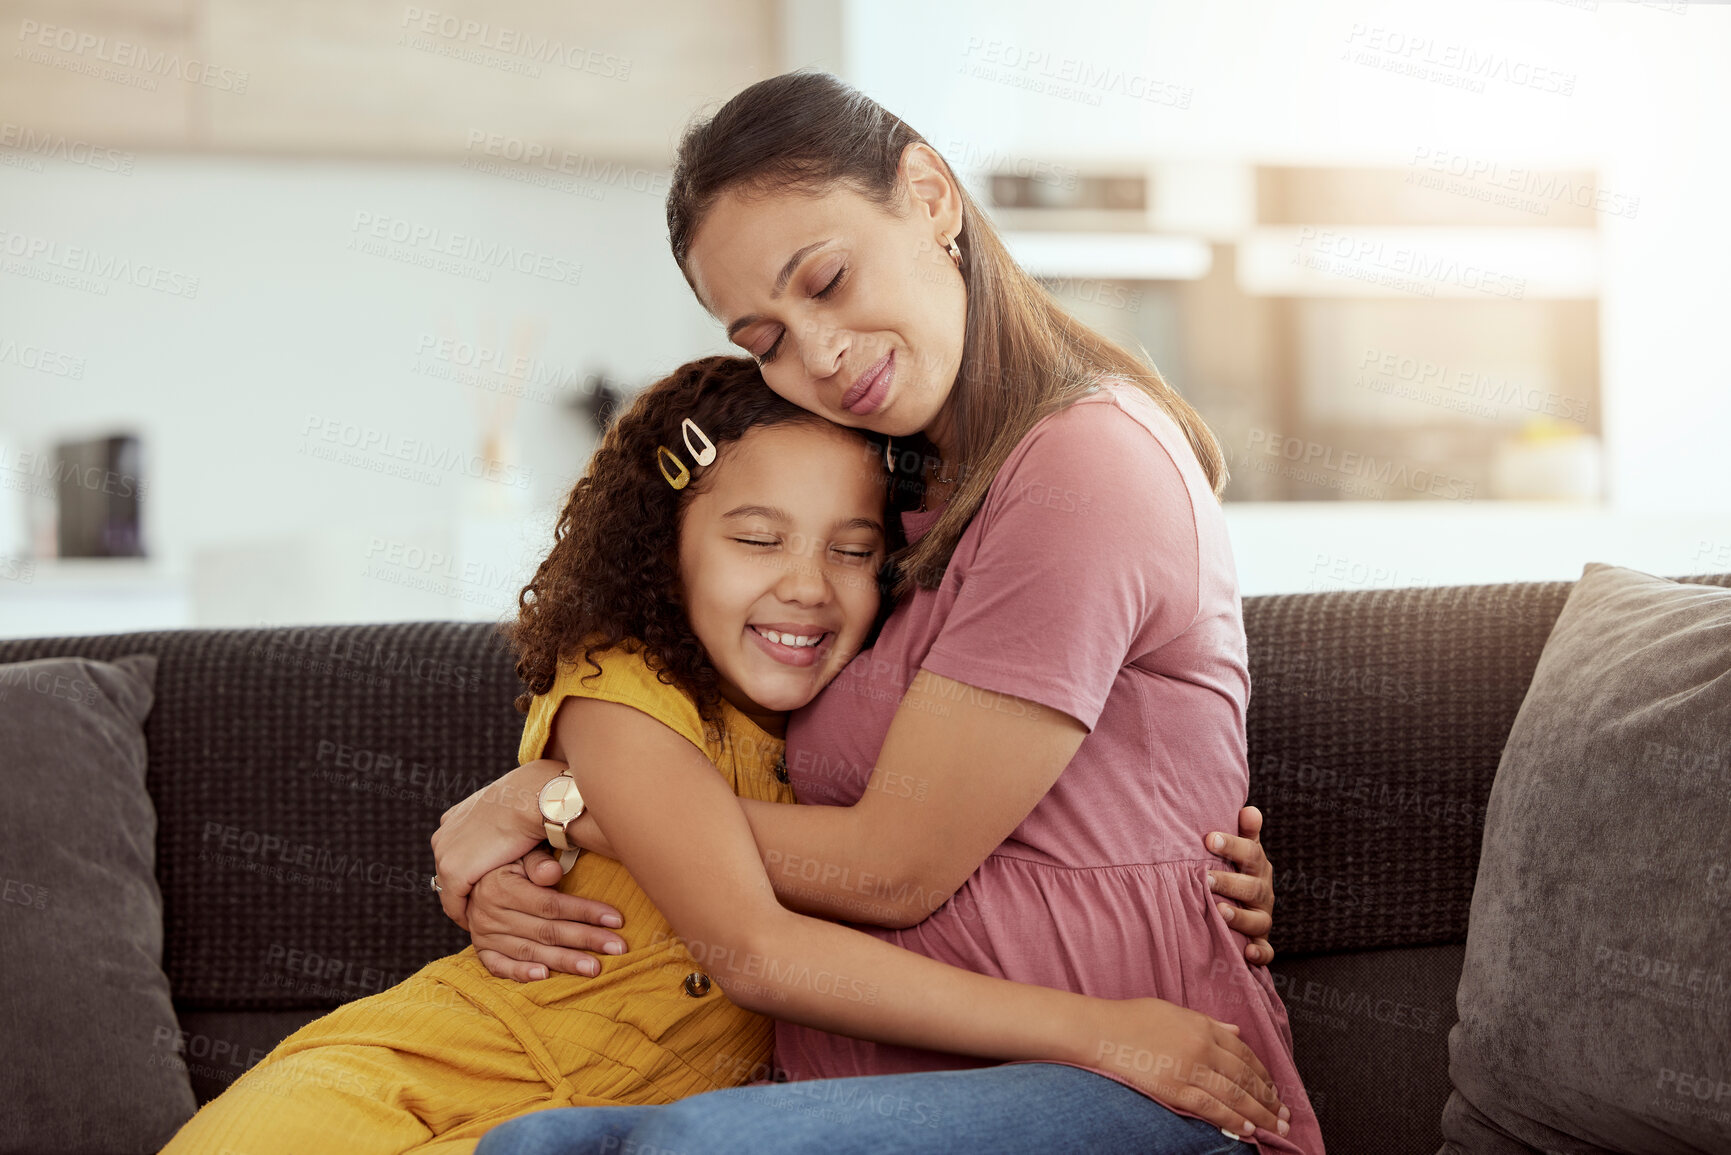 Buy stock photo Mixed race single mother and daughter hugging in home living room. Smiling hispanic girl embracing and bonding with single parent in lounge. Happy affectionate woman and child together on weekend